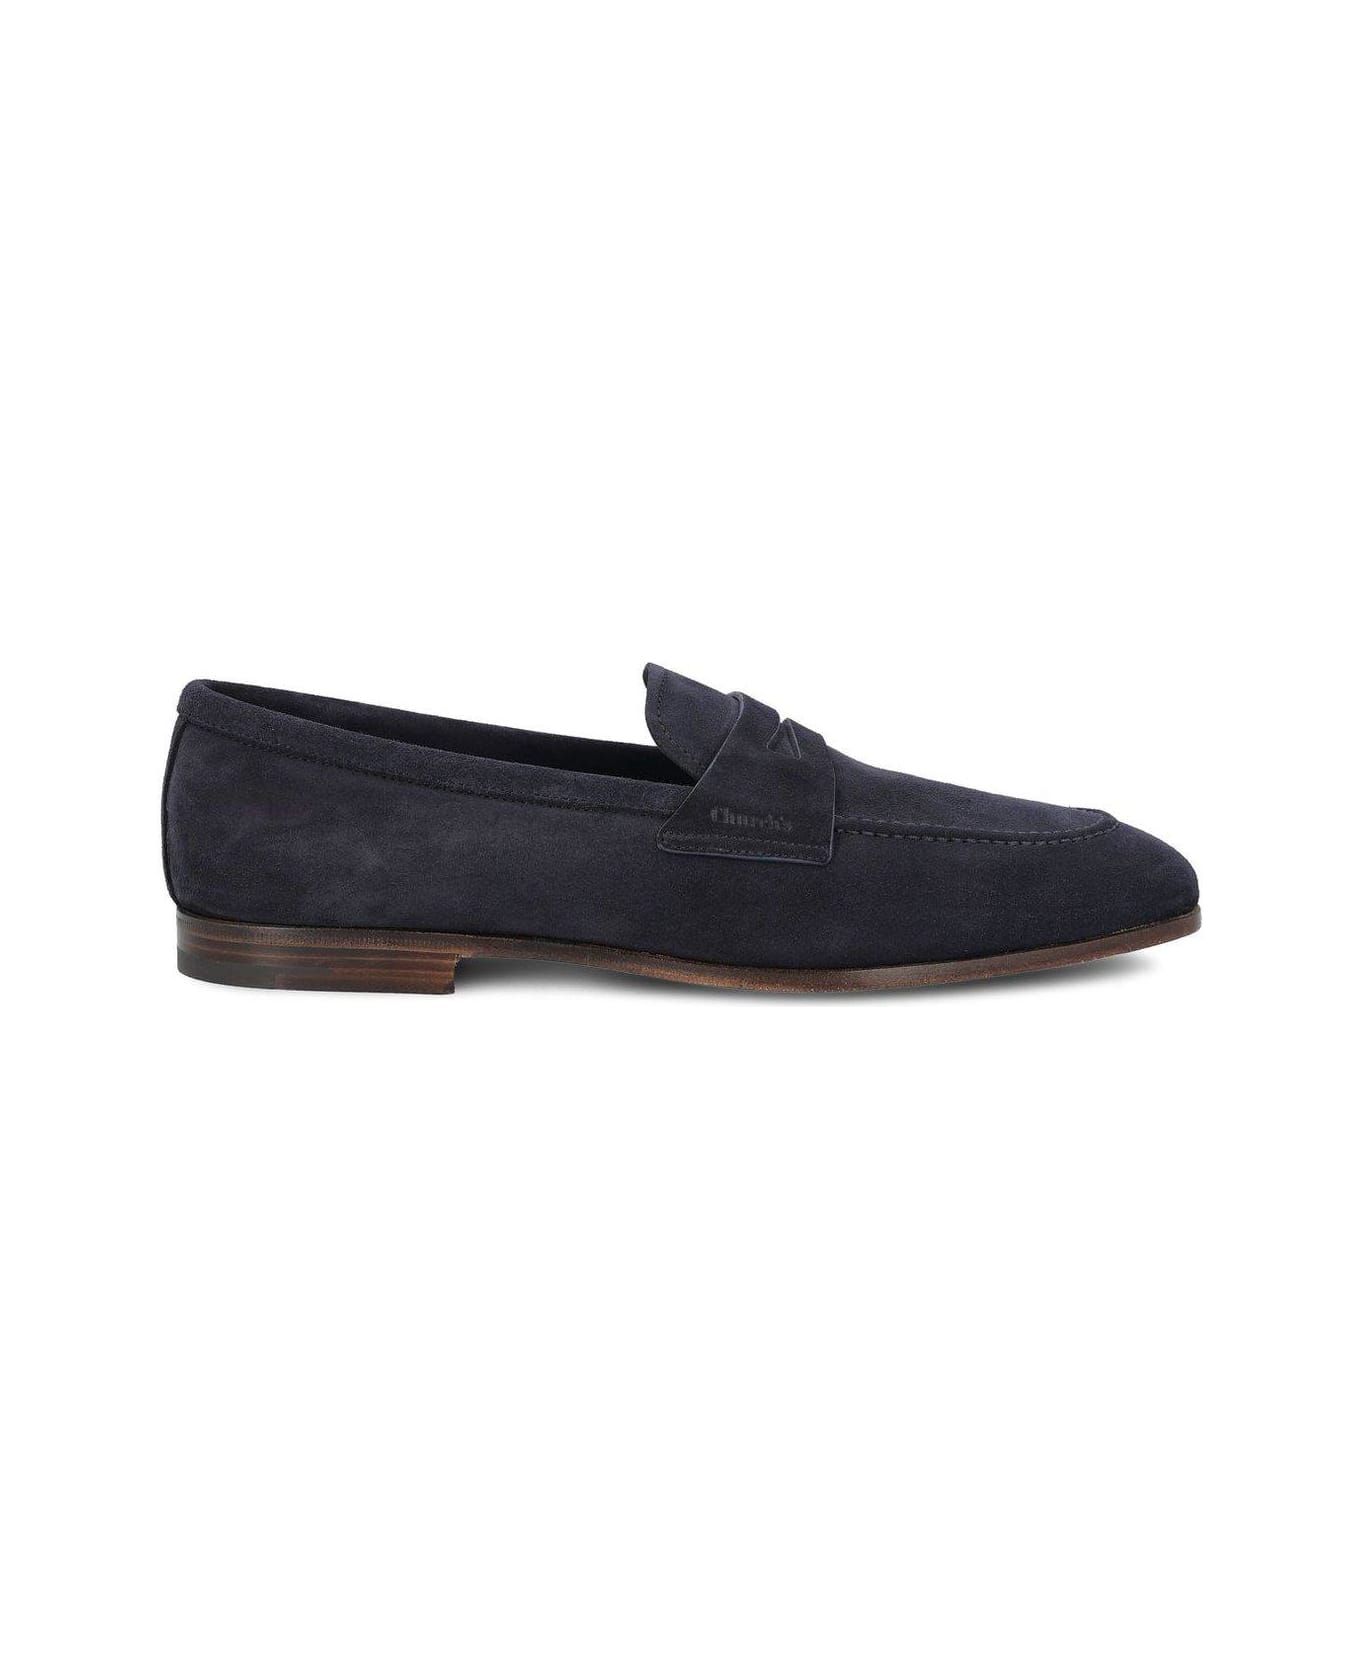 Church's Slip-on Loafers - NAVY